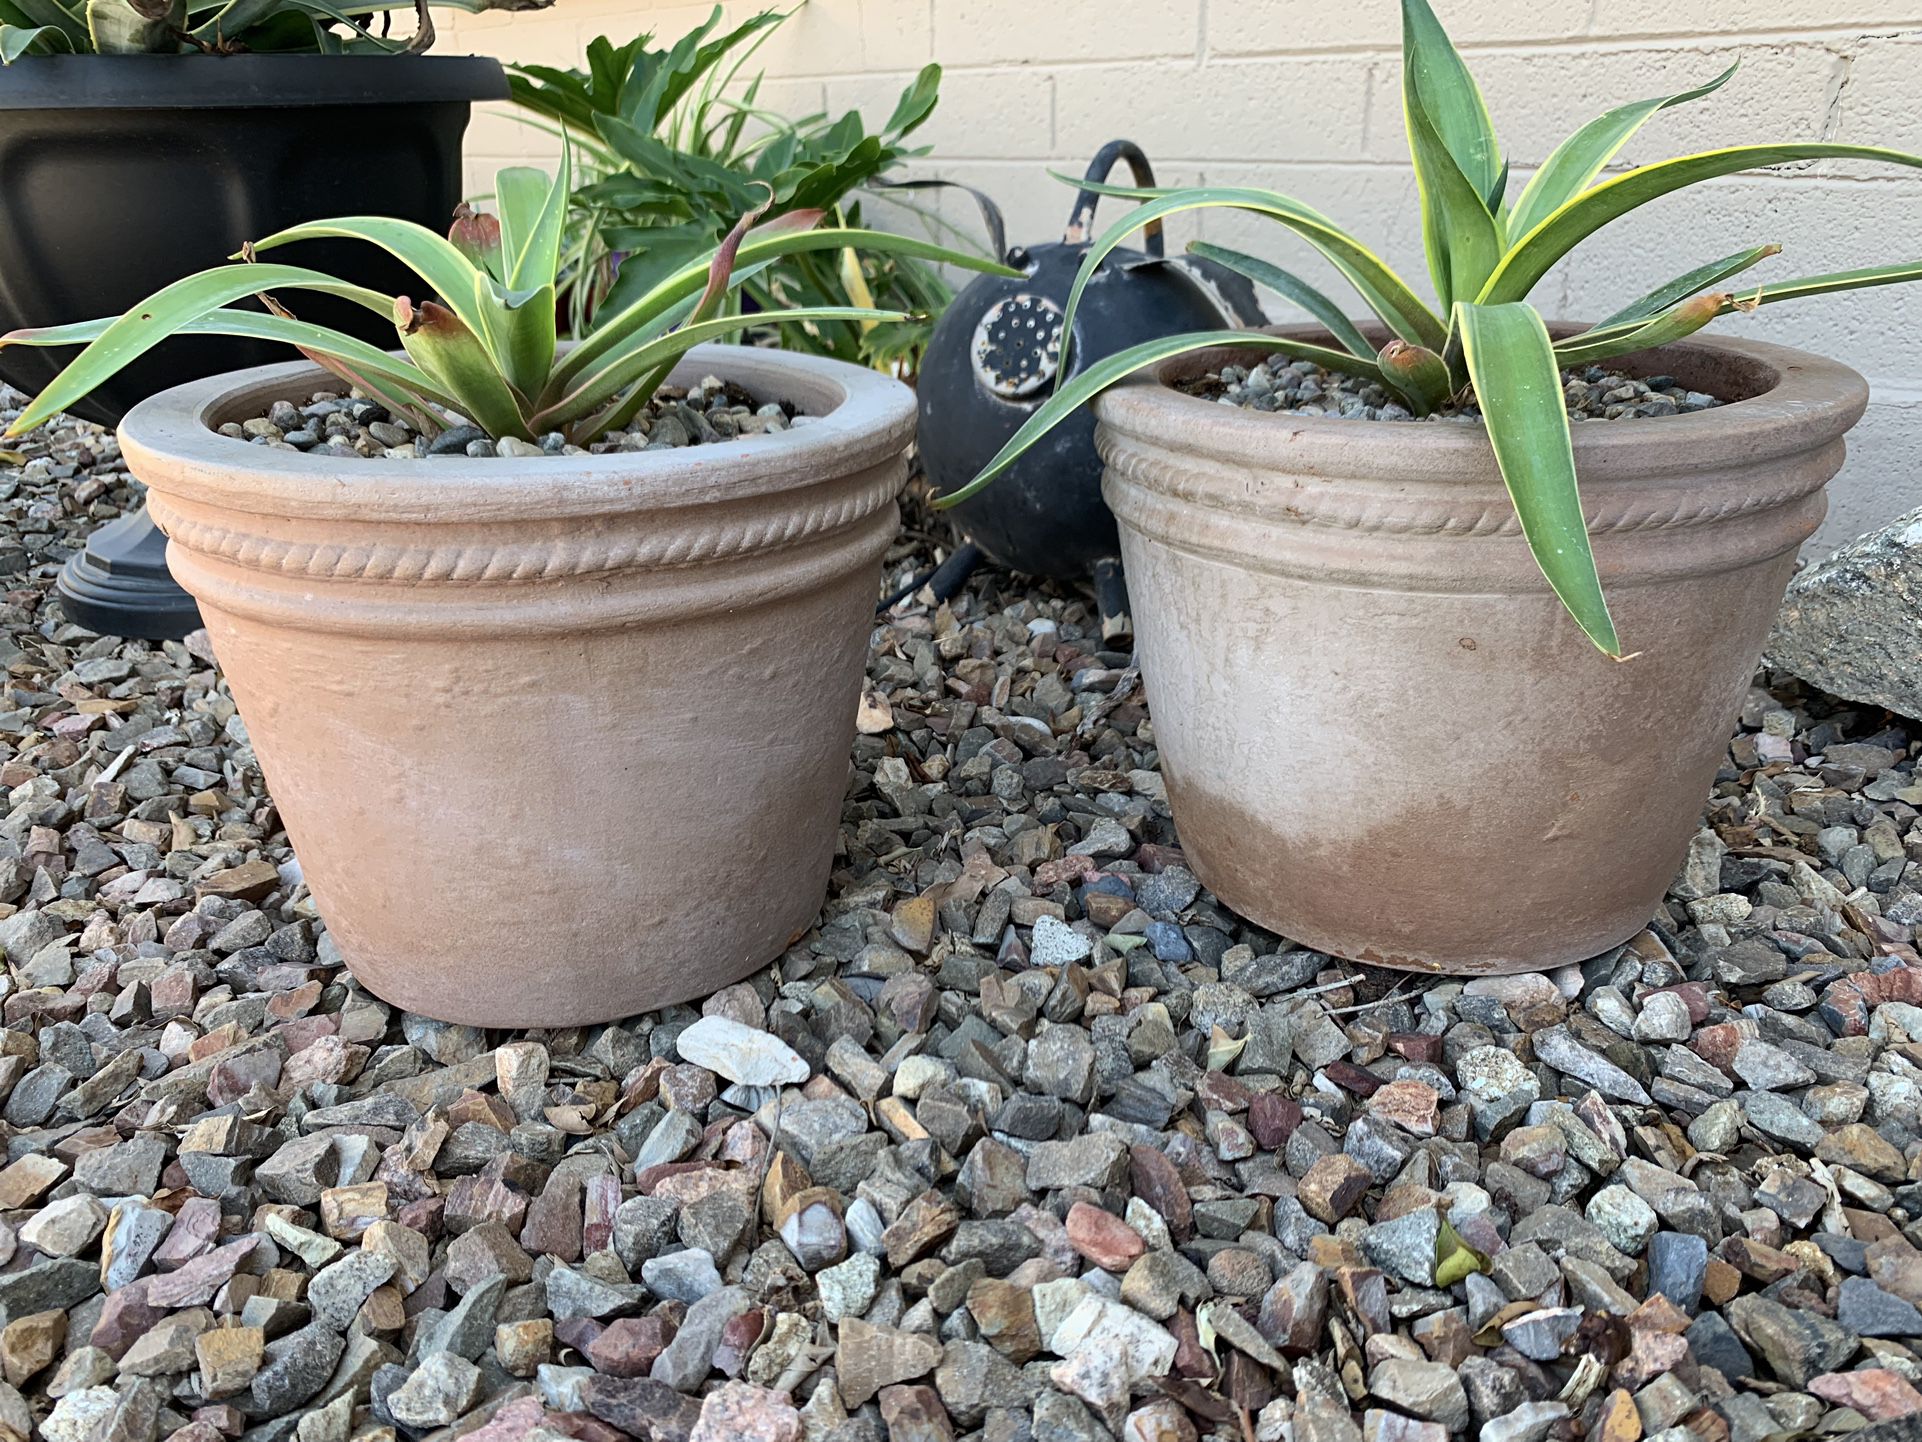 Smooth Agave Plants In Clay Pots